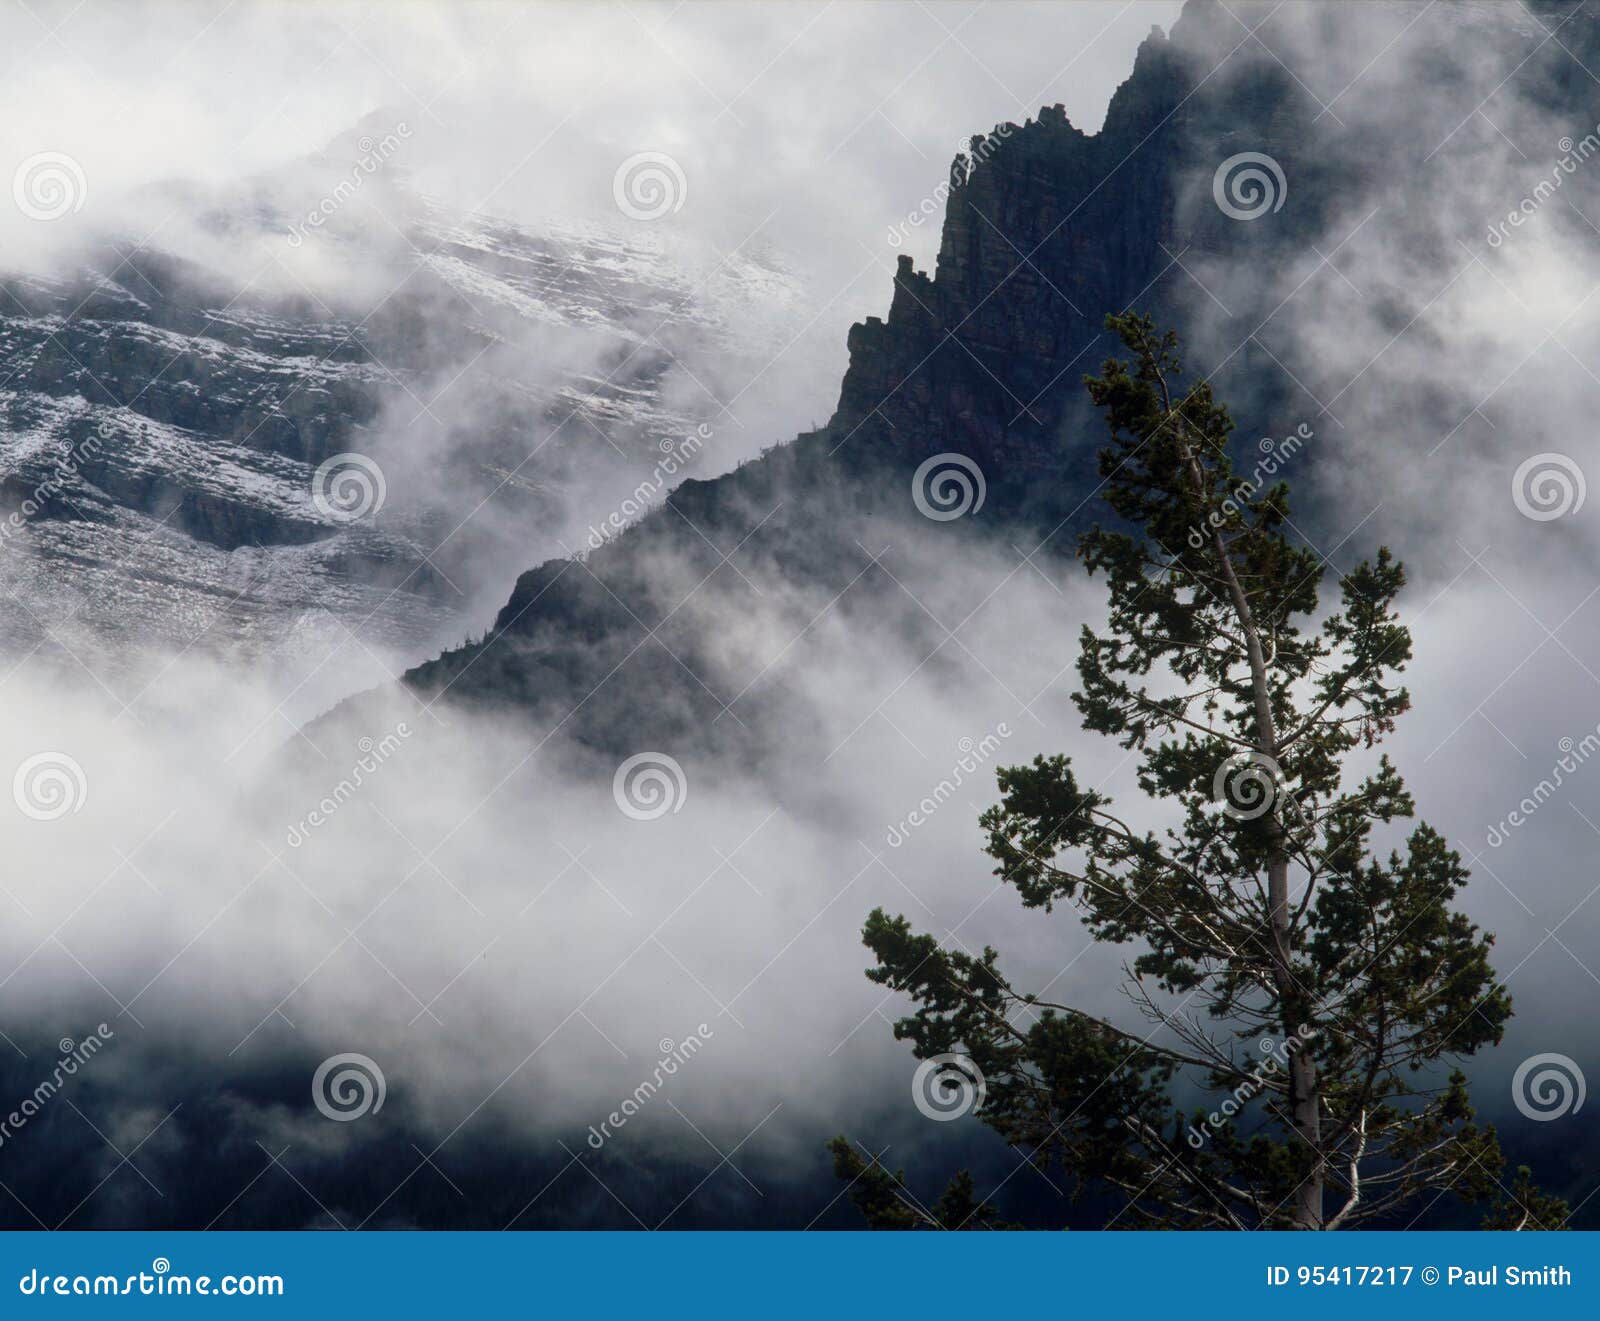 summer snowfall and clearing storm in the lewis range, glacier national park, montana